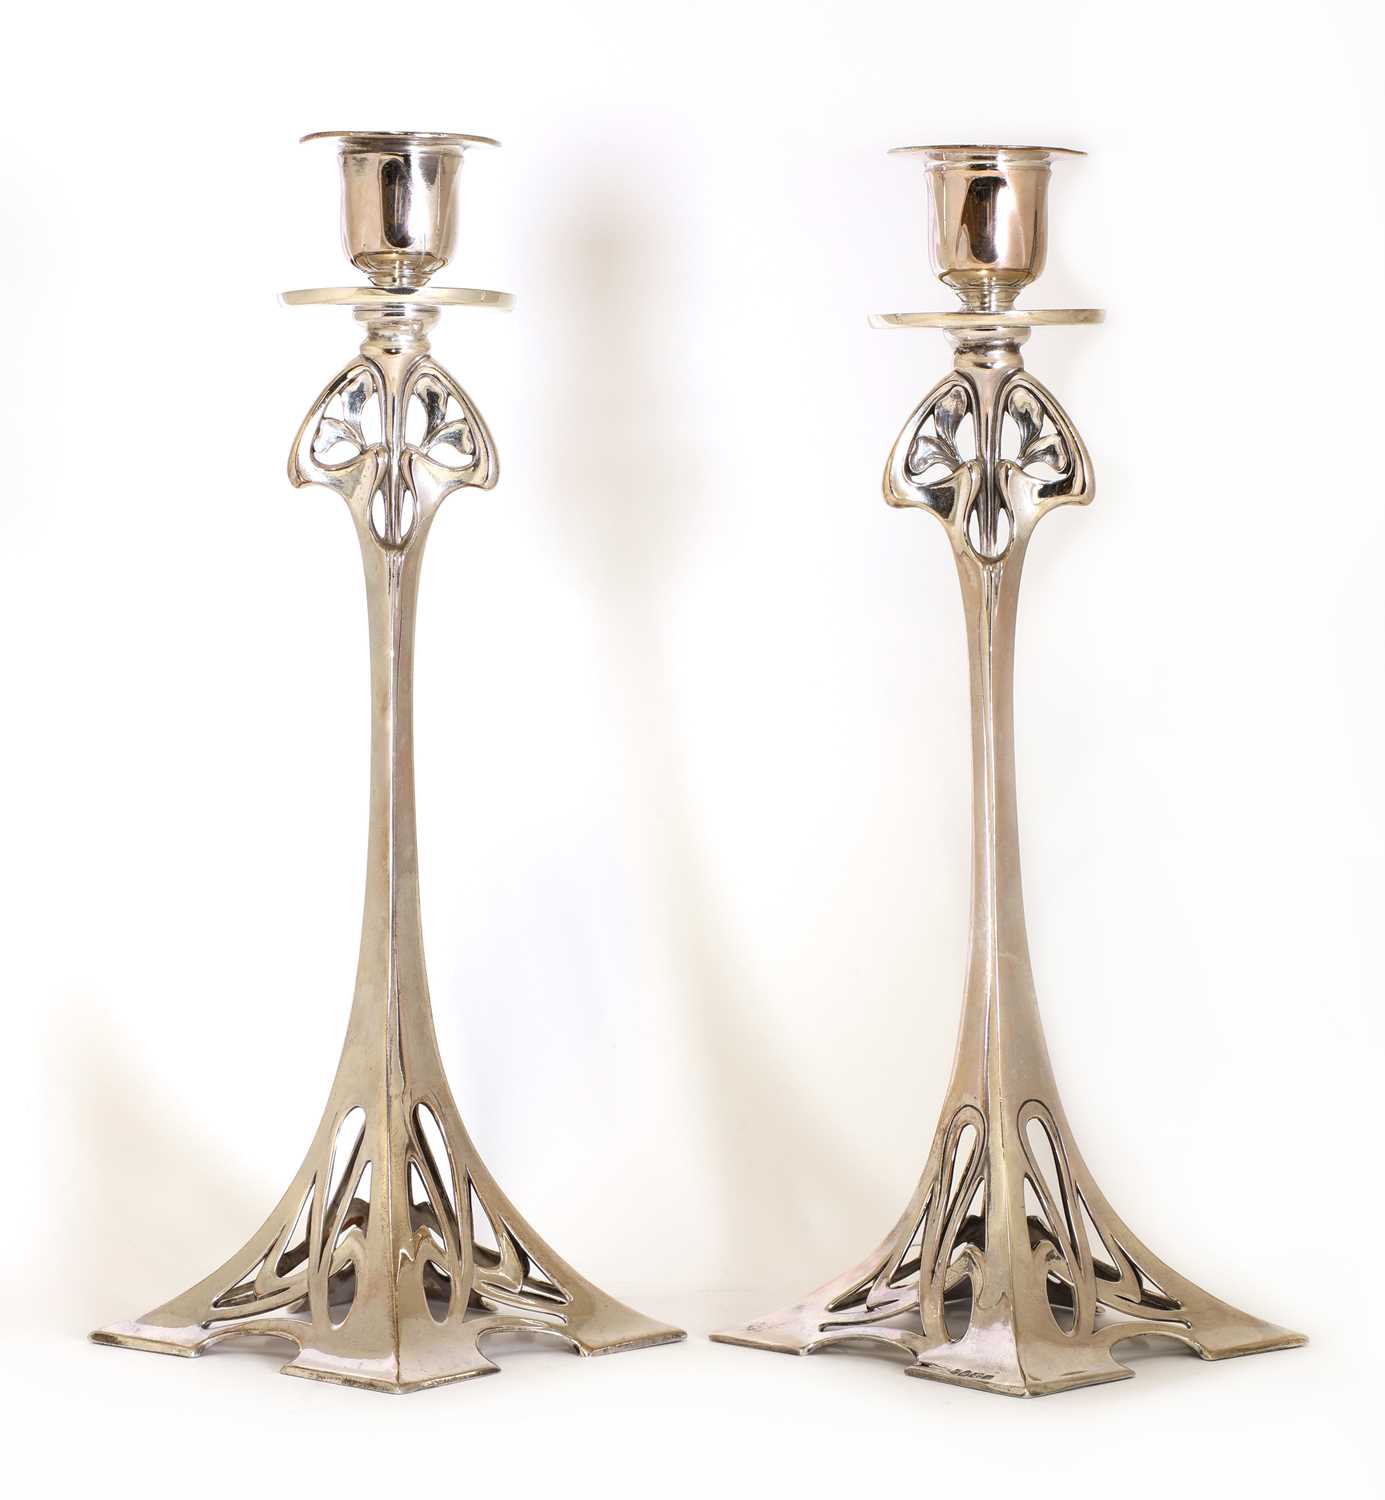 Lot 19 - A pair of WMF silver-plated candlesticks